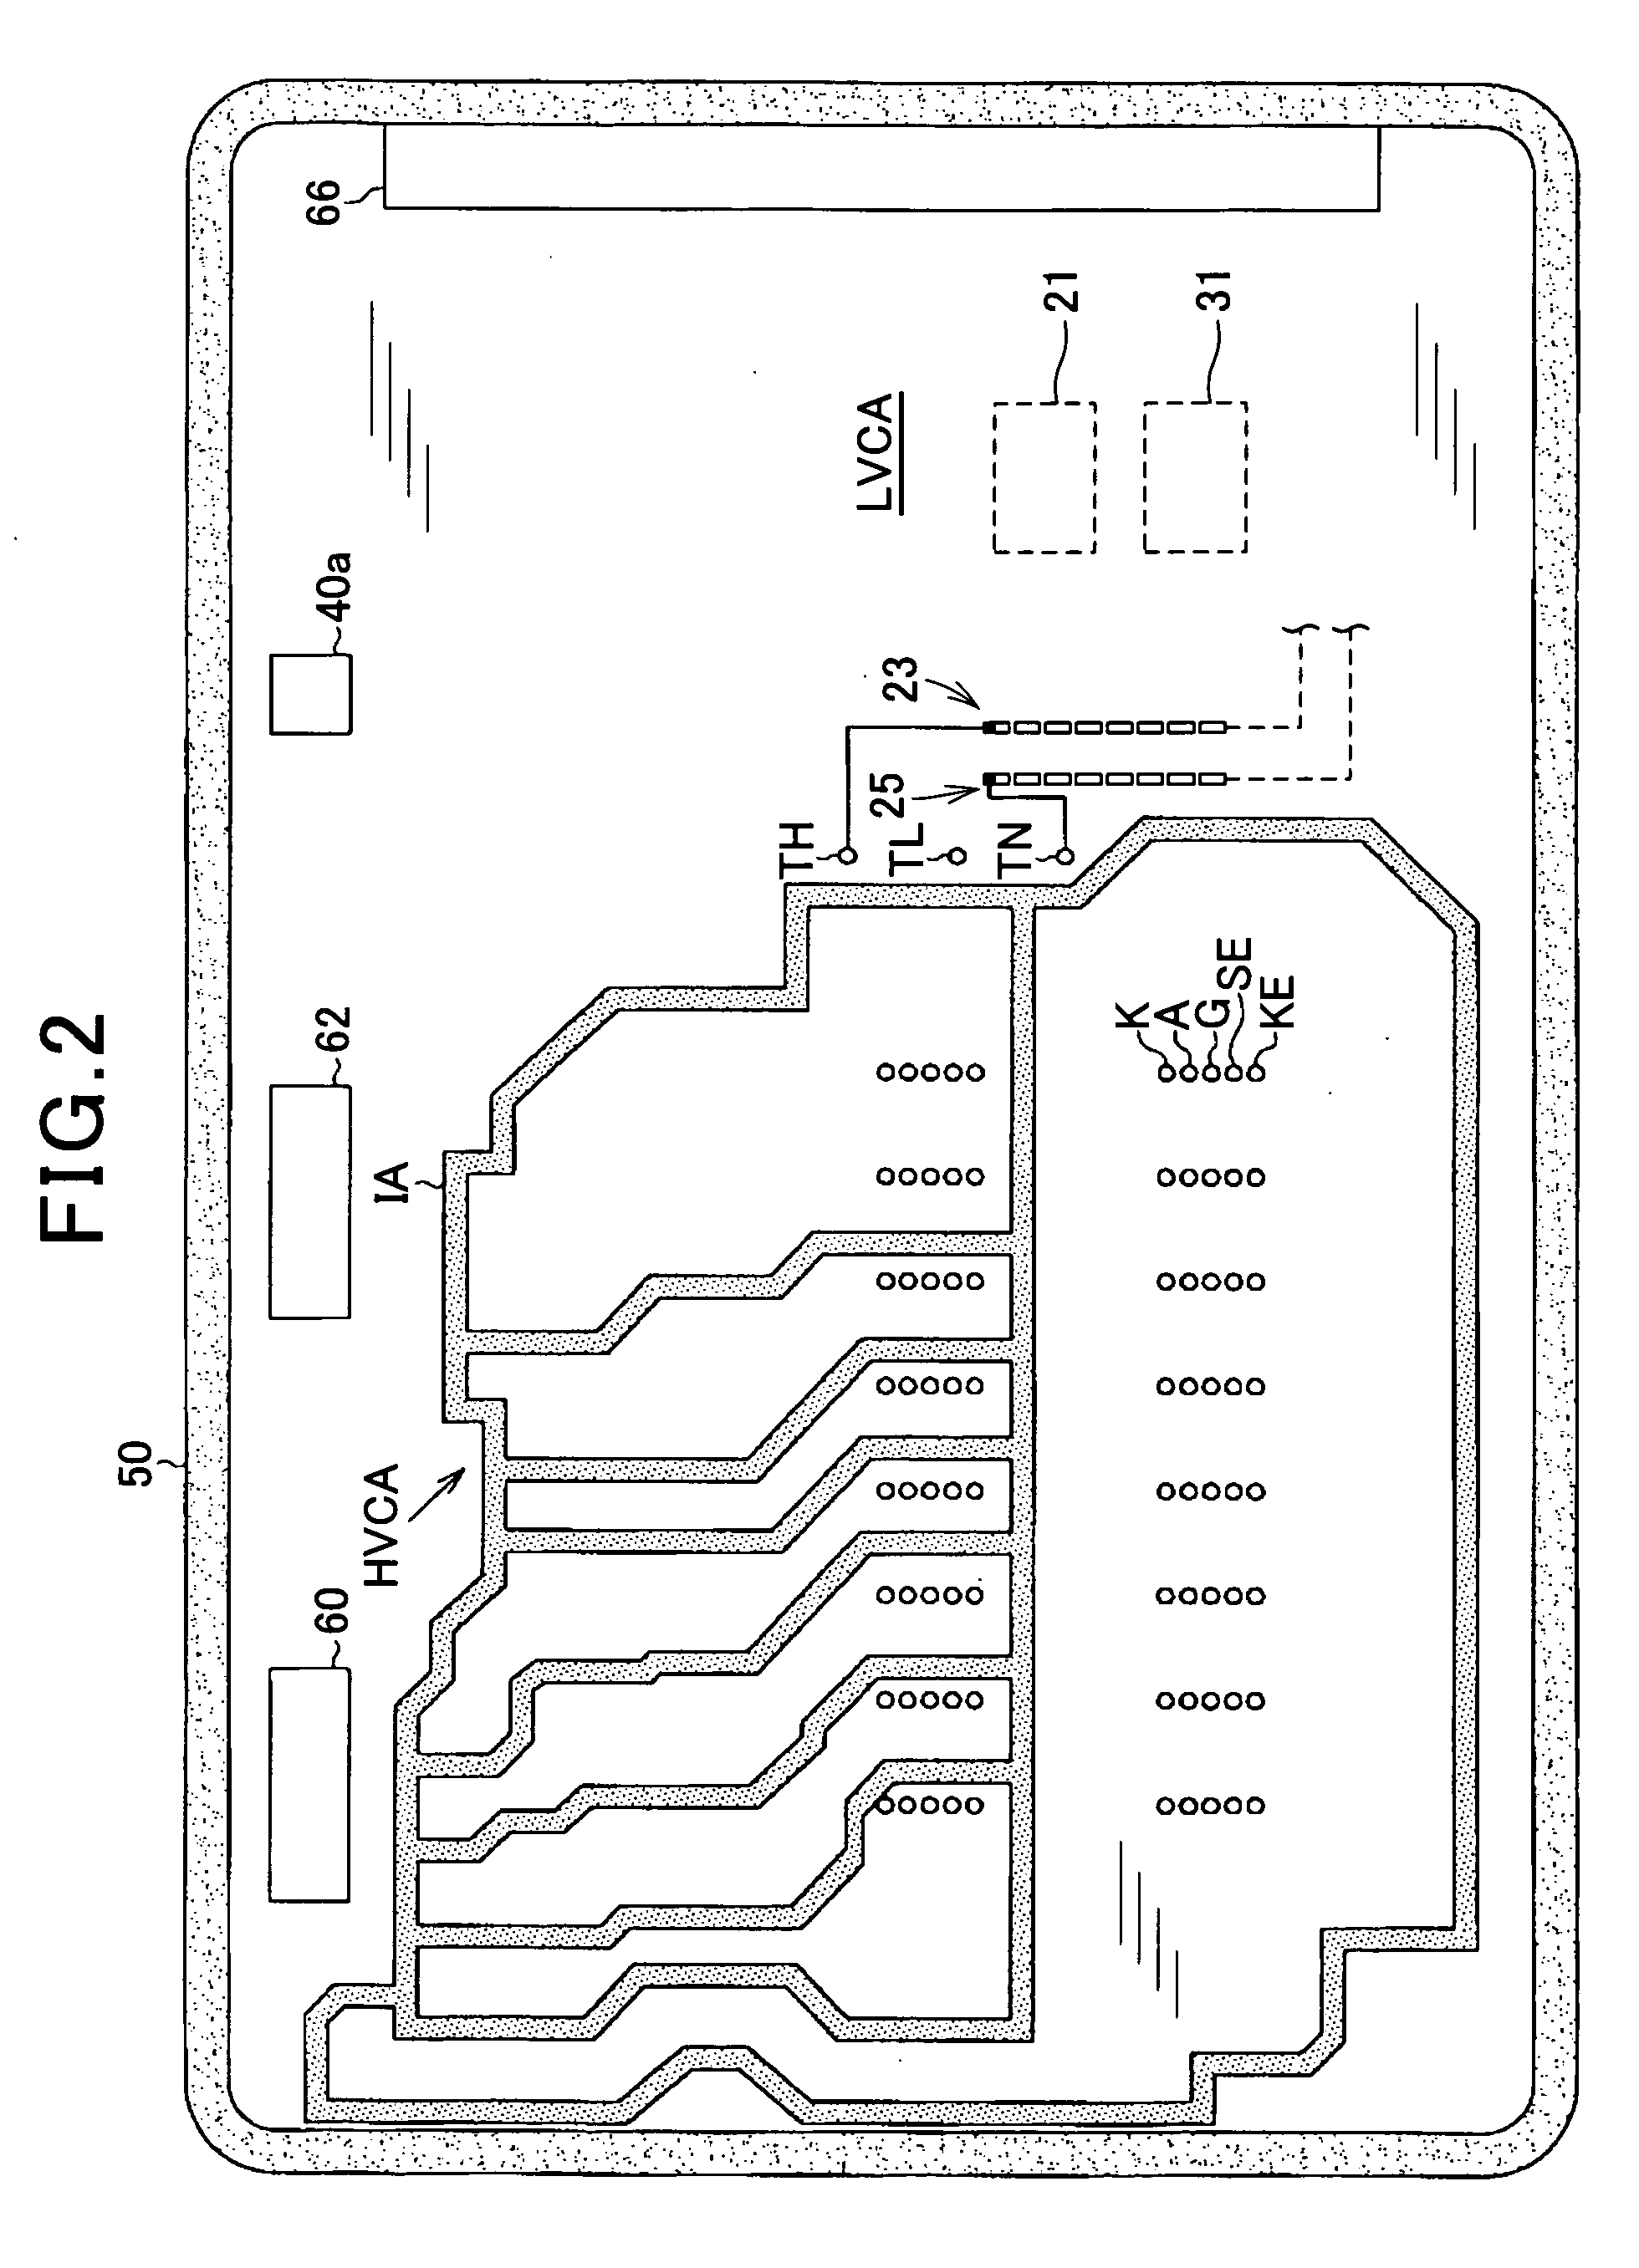 Power conversion apparatus provided with substrate having insulating area